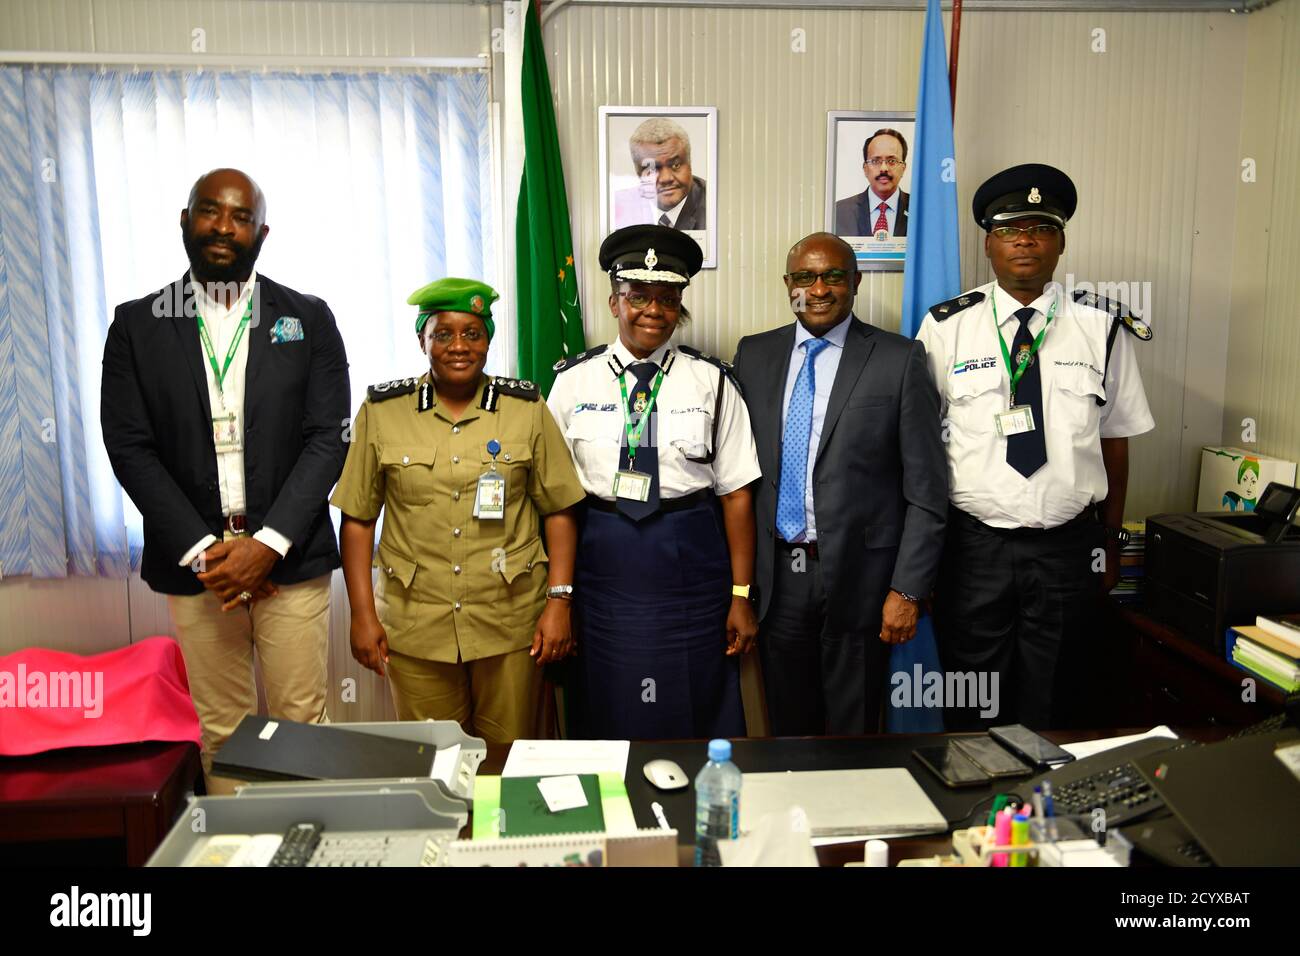 Deputy SRCC, Simon Mulongo, stands with Assistant Inspector General of Police, Gloria Tarawally, and Acting Police Commisioner, Christine Alalo, at the AMISOM headquarters in Mogadishu, Somalia, on 28 September 2018. Stock Photo